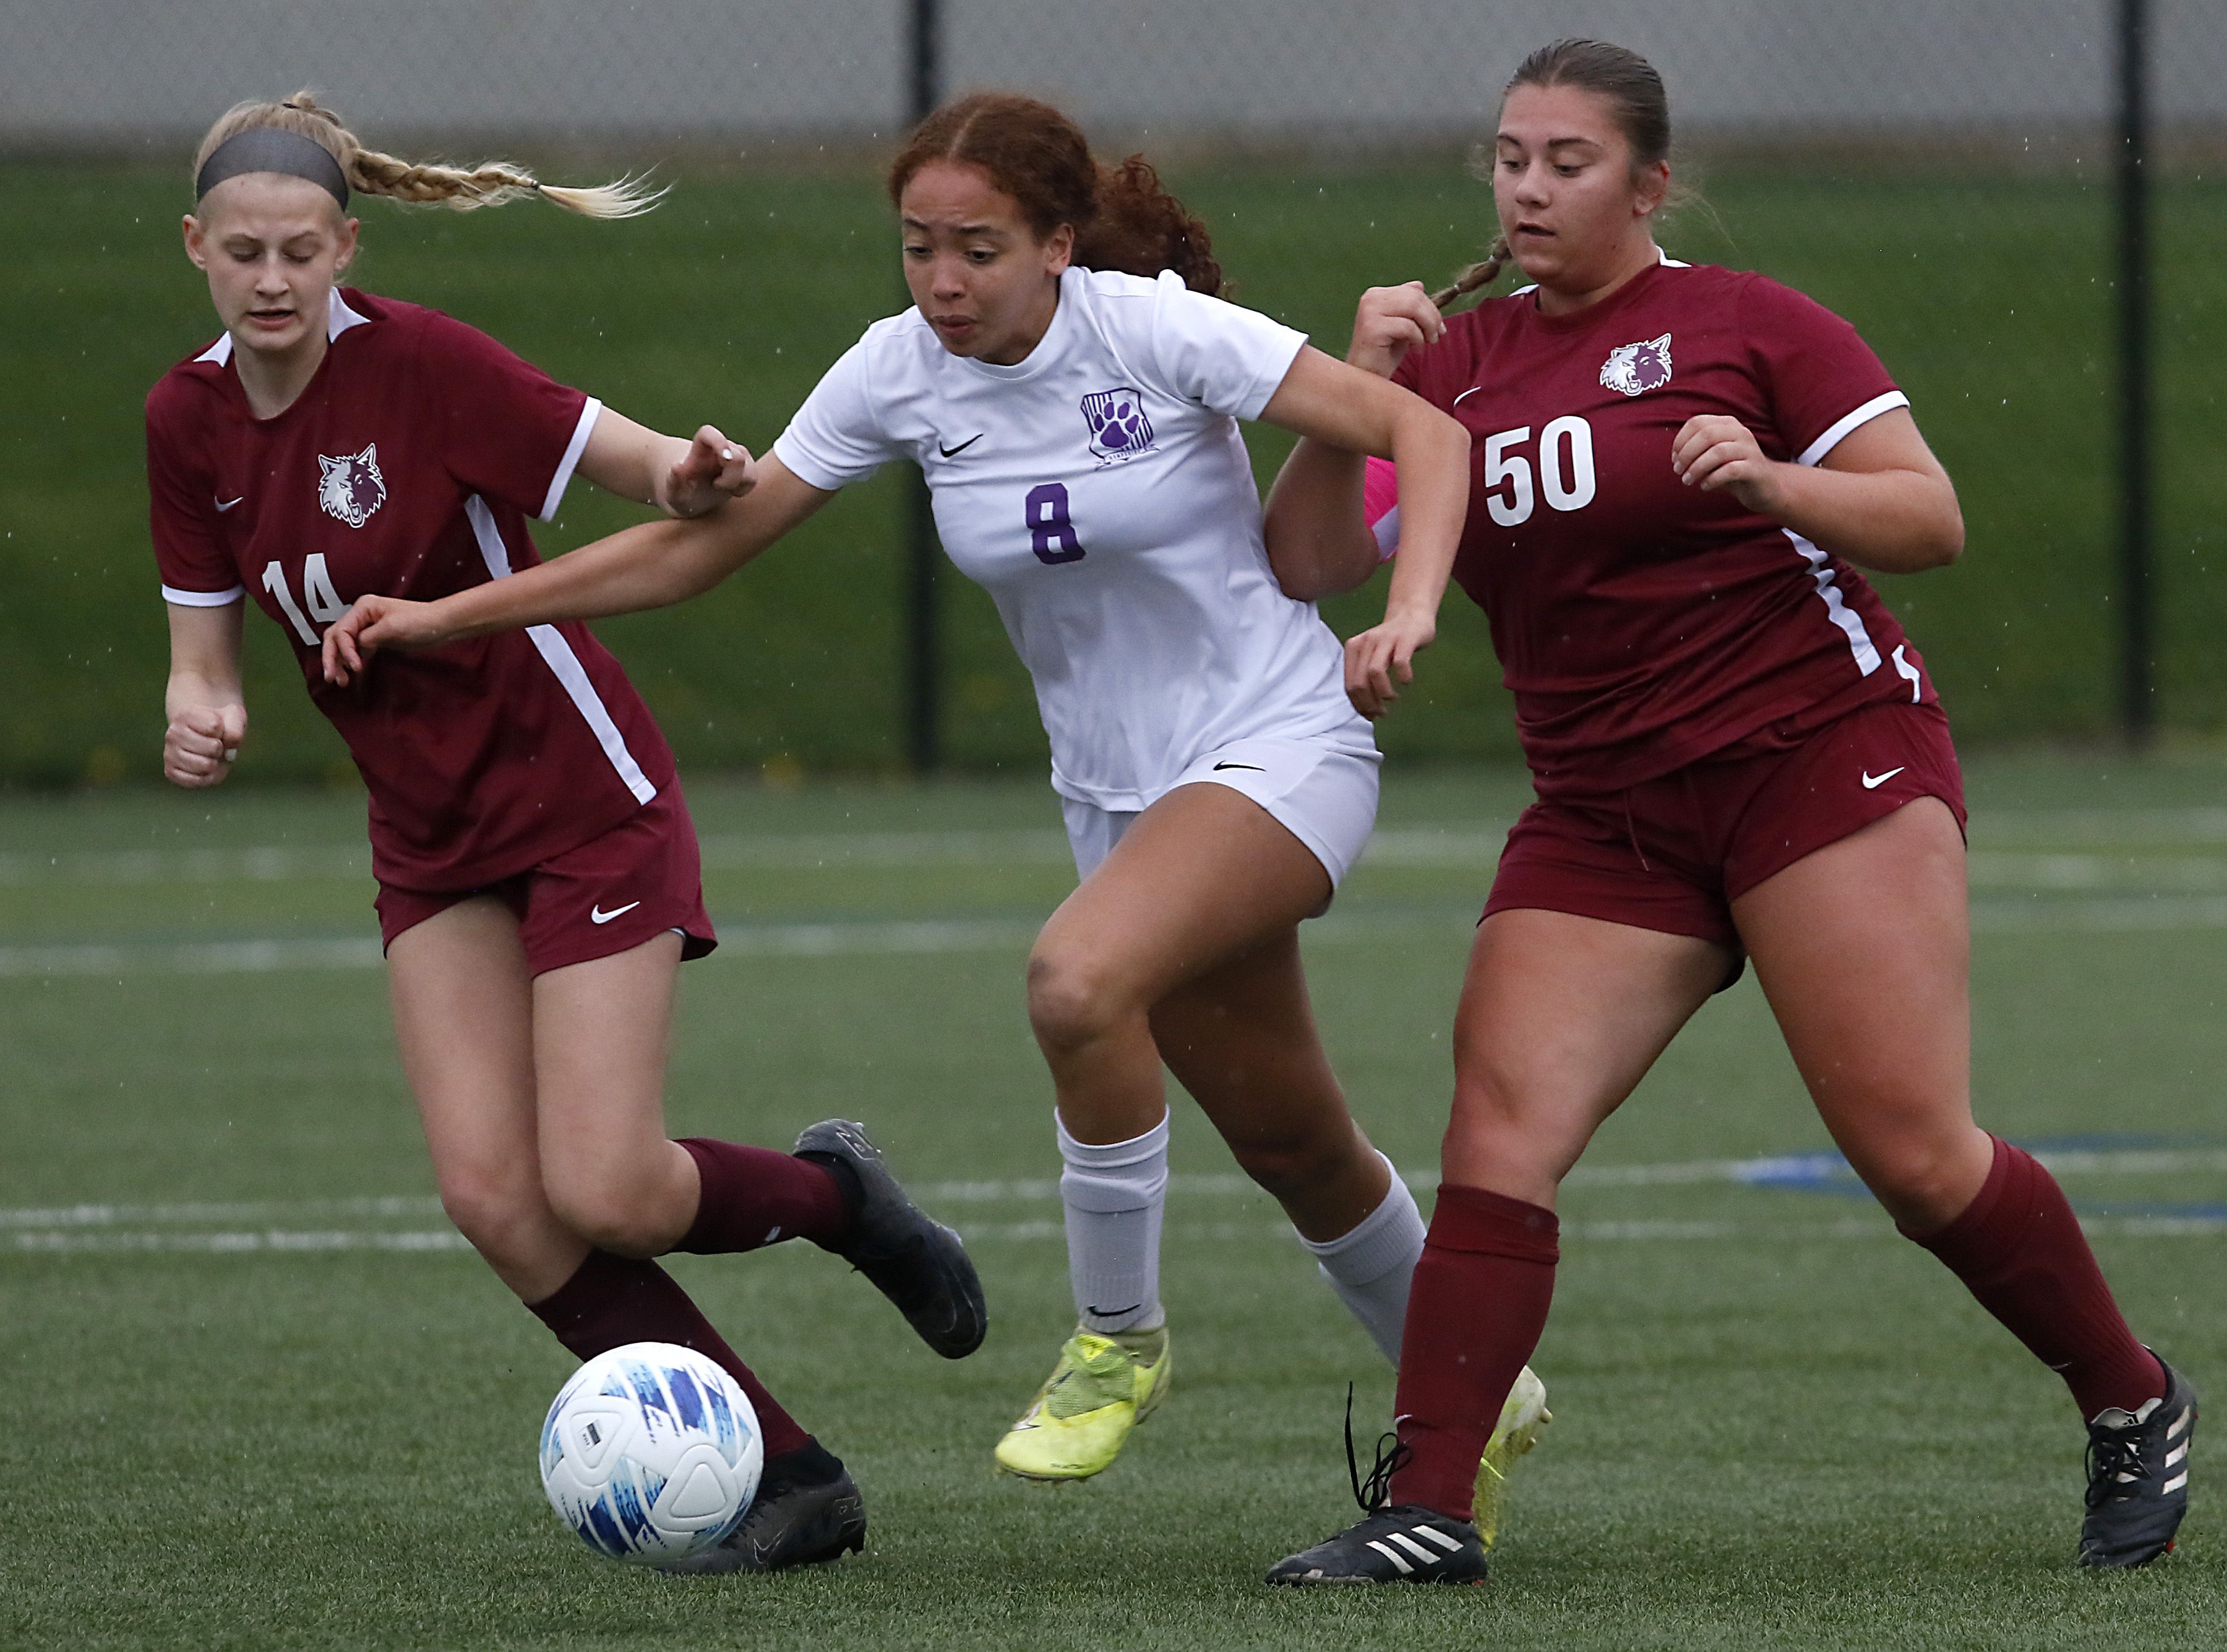 Hampshire's Mikala Amegasse tries to control he ball between Prairie Ridge's Sarah Mayes, left, and Grace Wolf during their Fox Valley Conference match on Tuesday at the MAC Athletic Complex in Crystal Lake.